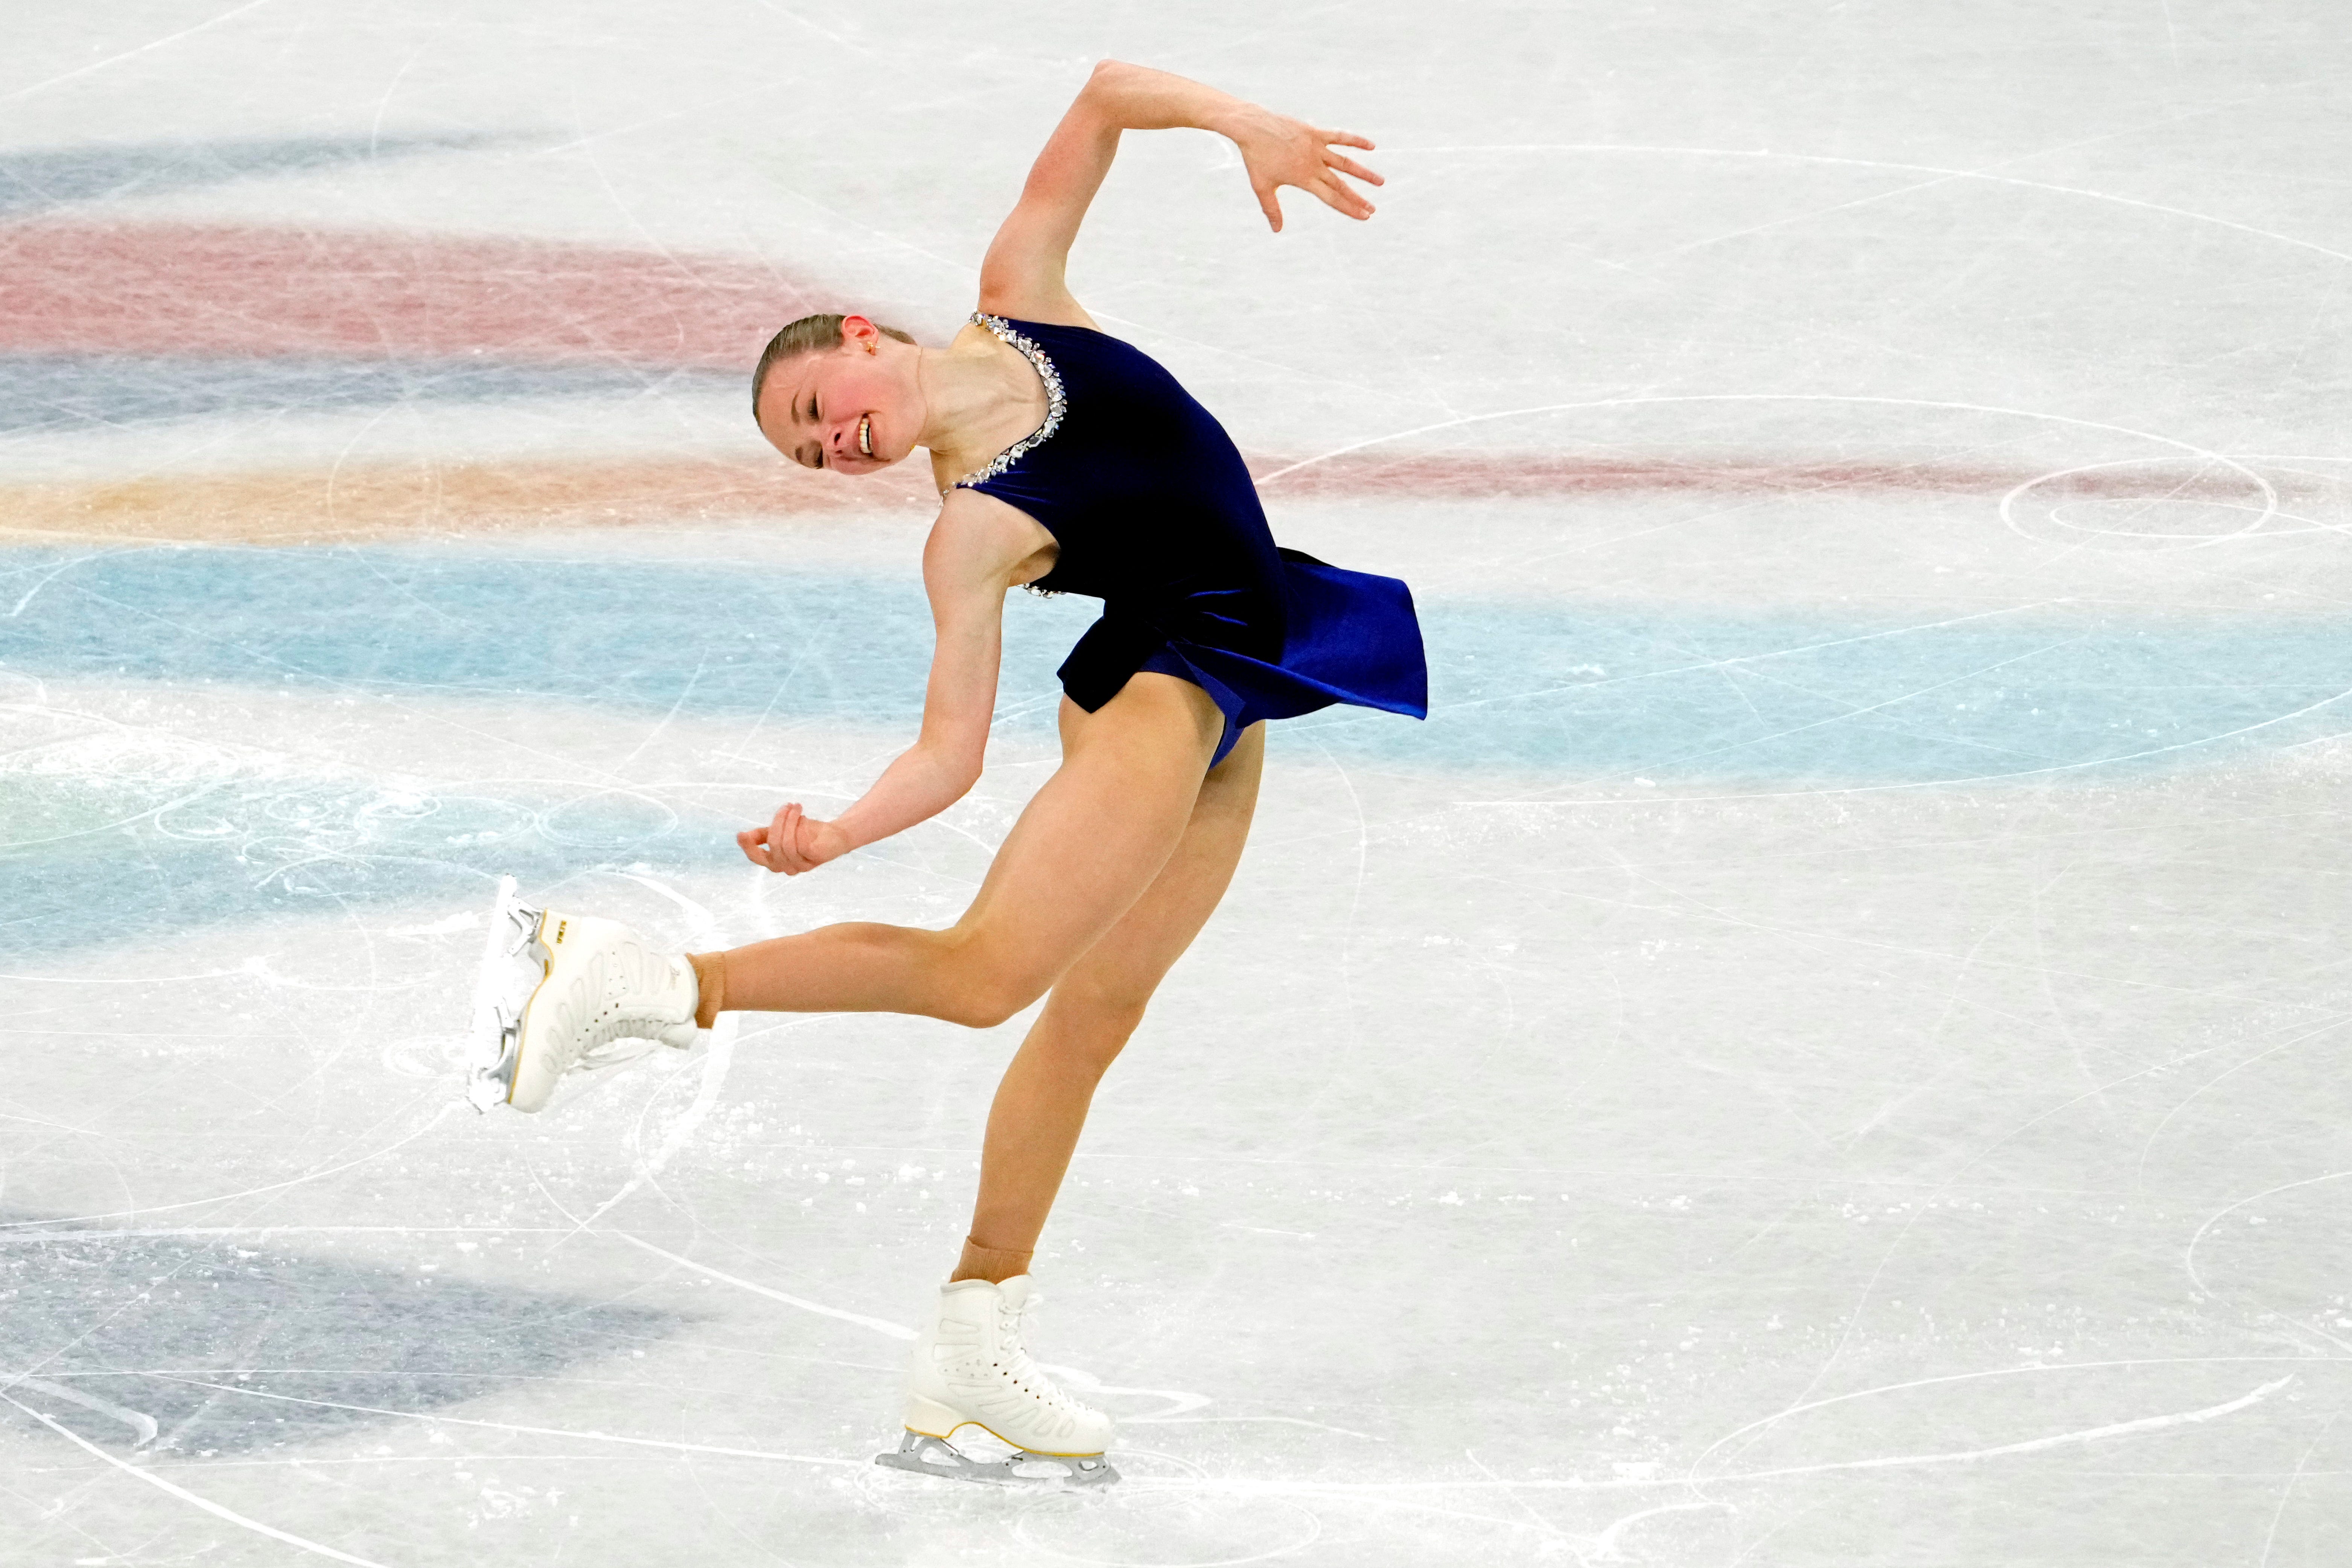 Winter Olympics live updates Americans on ice in womens figure skating; Russian teen skates despite controversy The Valley